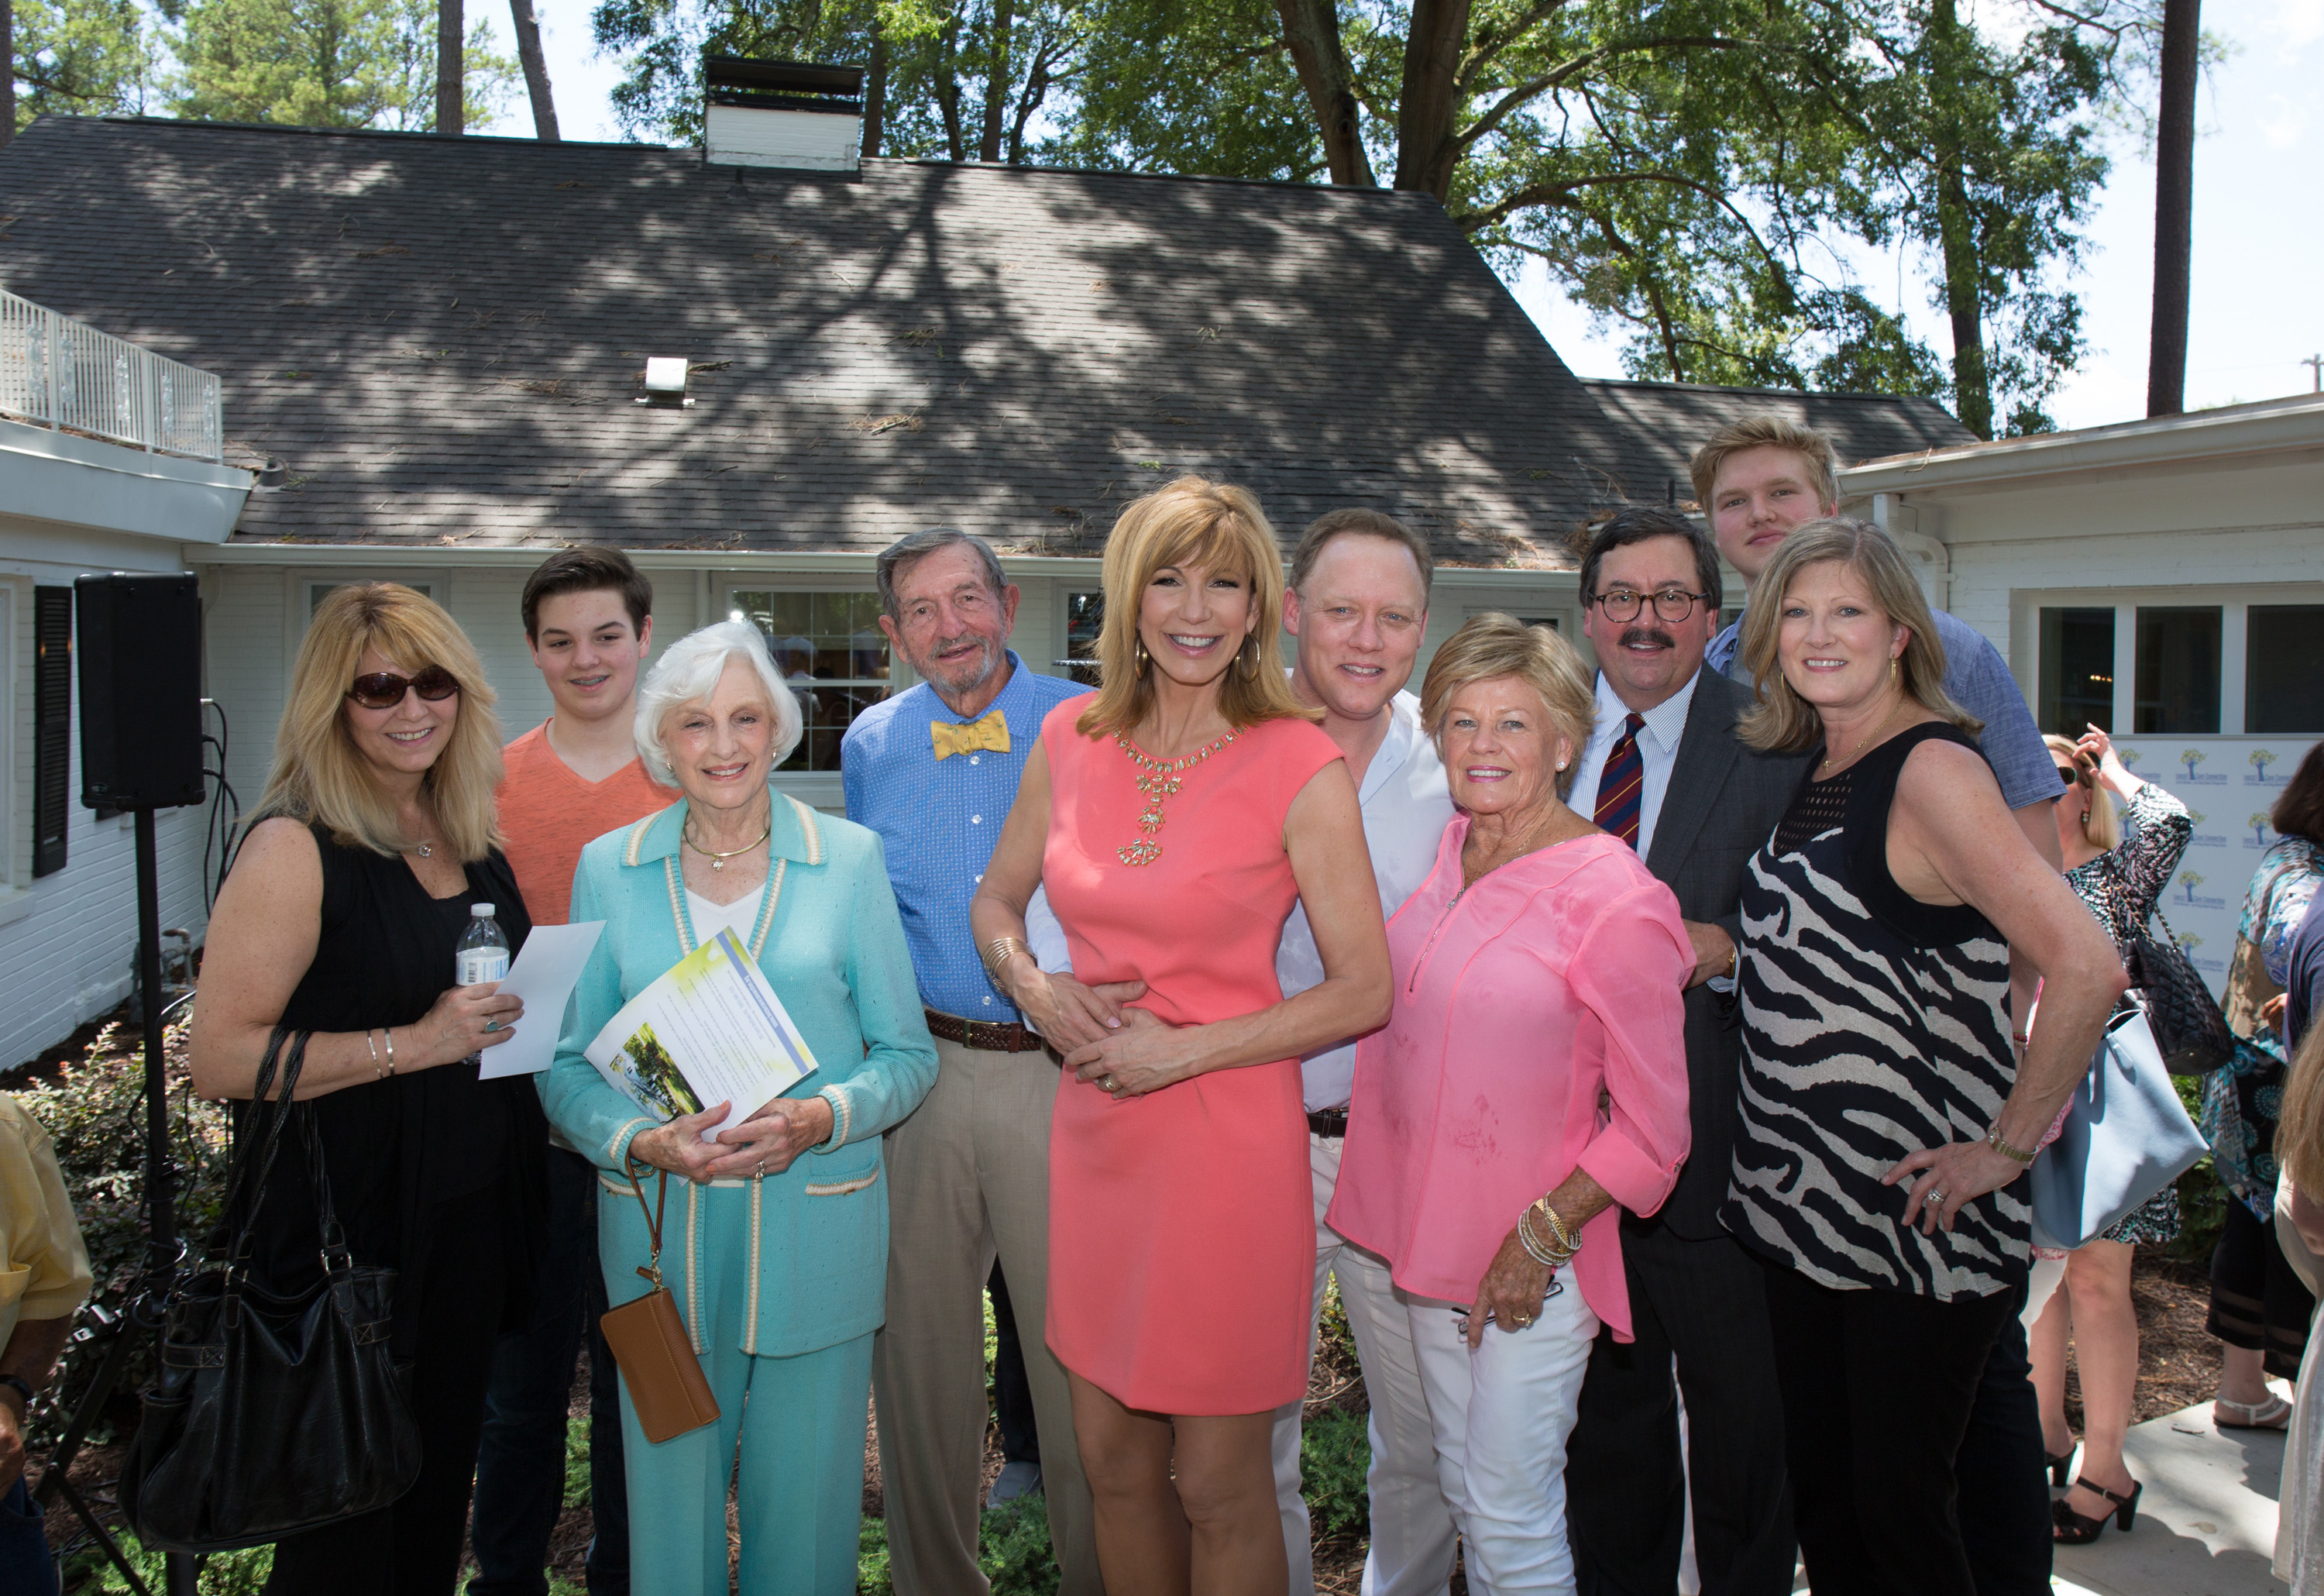 A Family Affair! Leeza Gibbons celebrates the opening of LEEZA’S CARE CONNECTION with her family in Irmo, SC. Photo by Jeff Amberg.